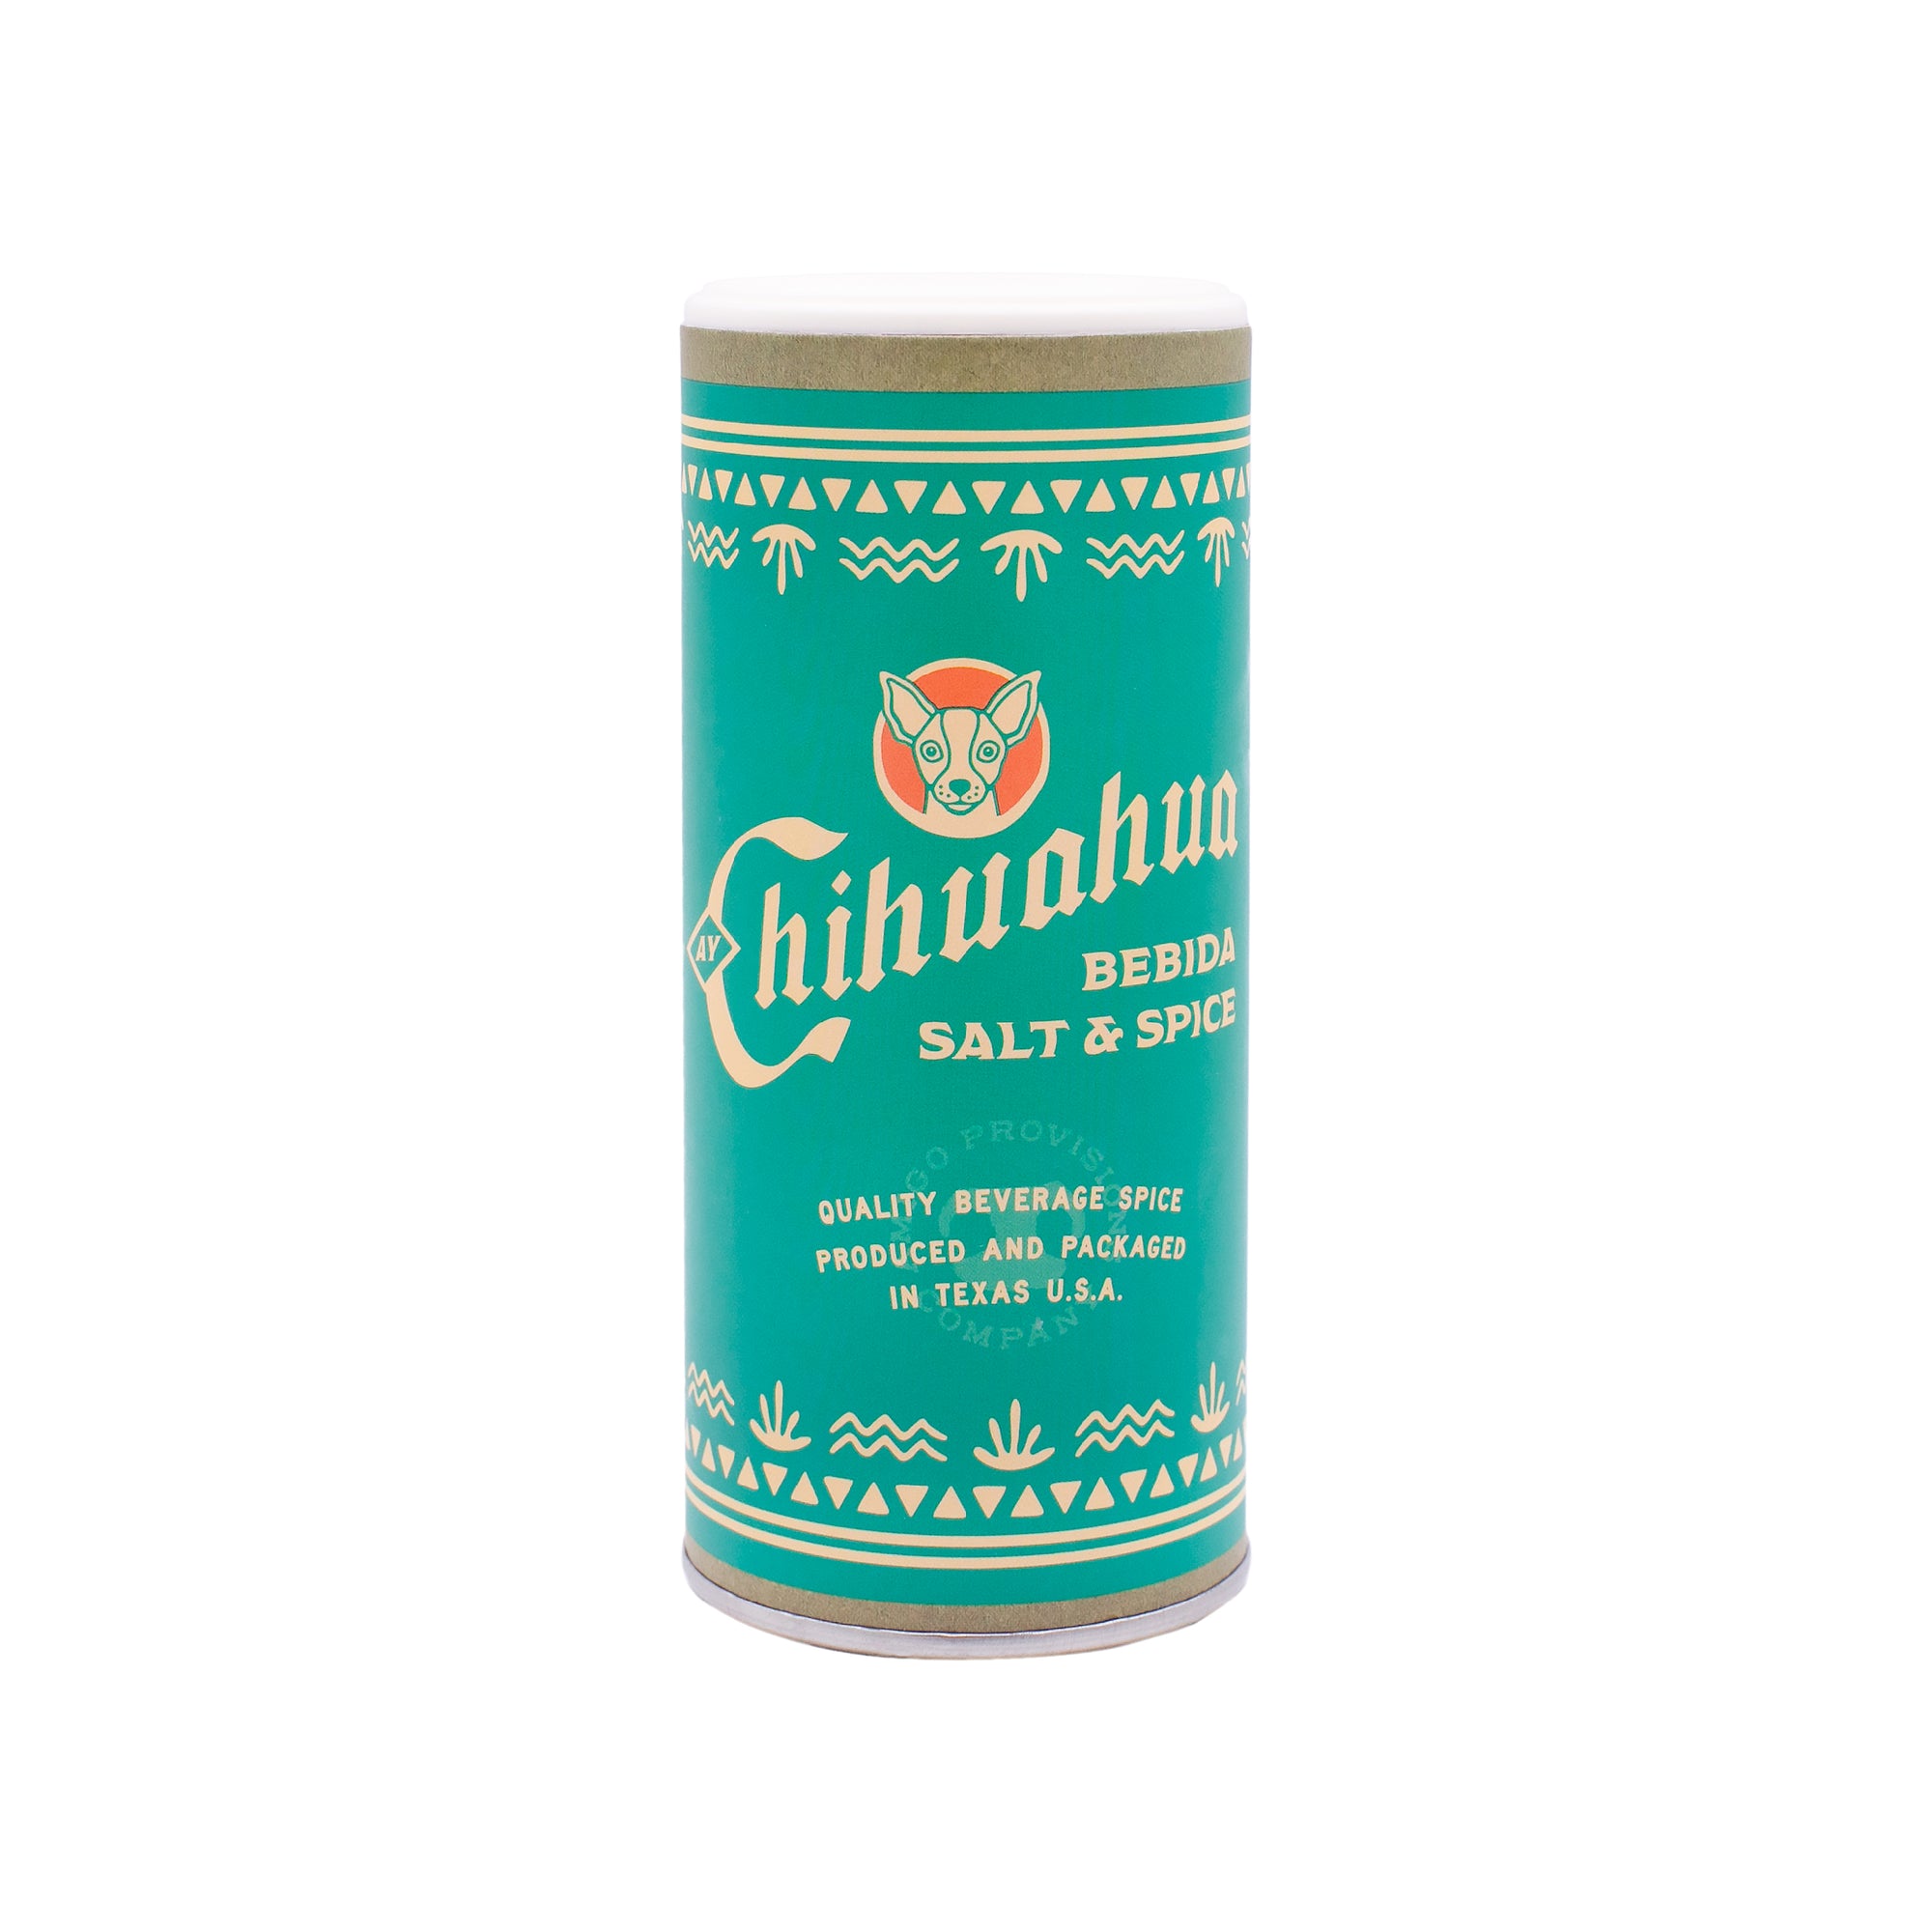 Ay Chihuahua Cocktail Salt & Spice